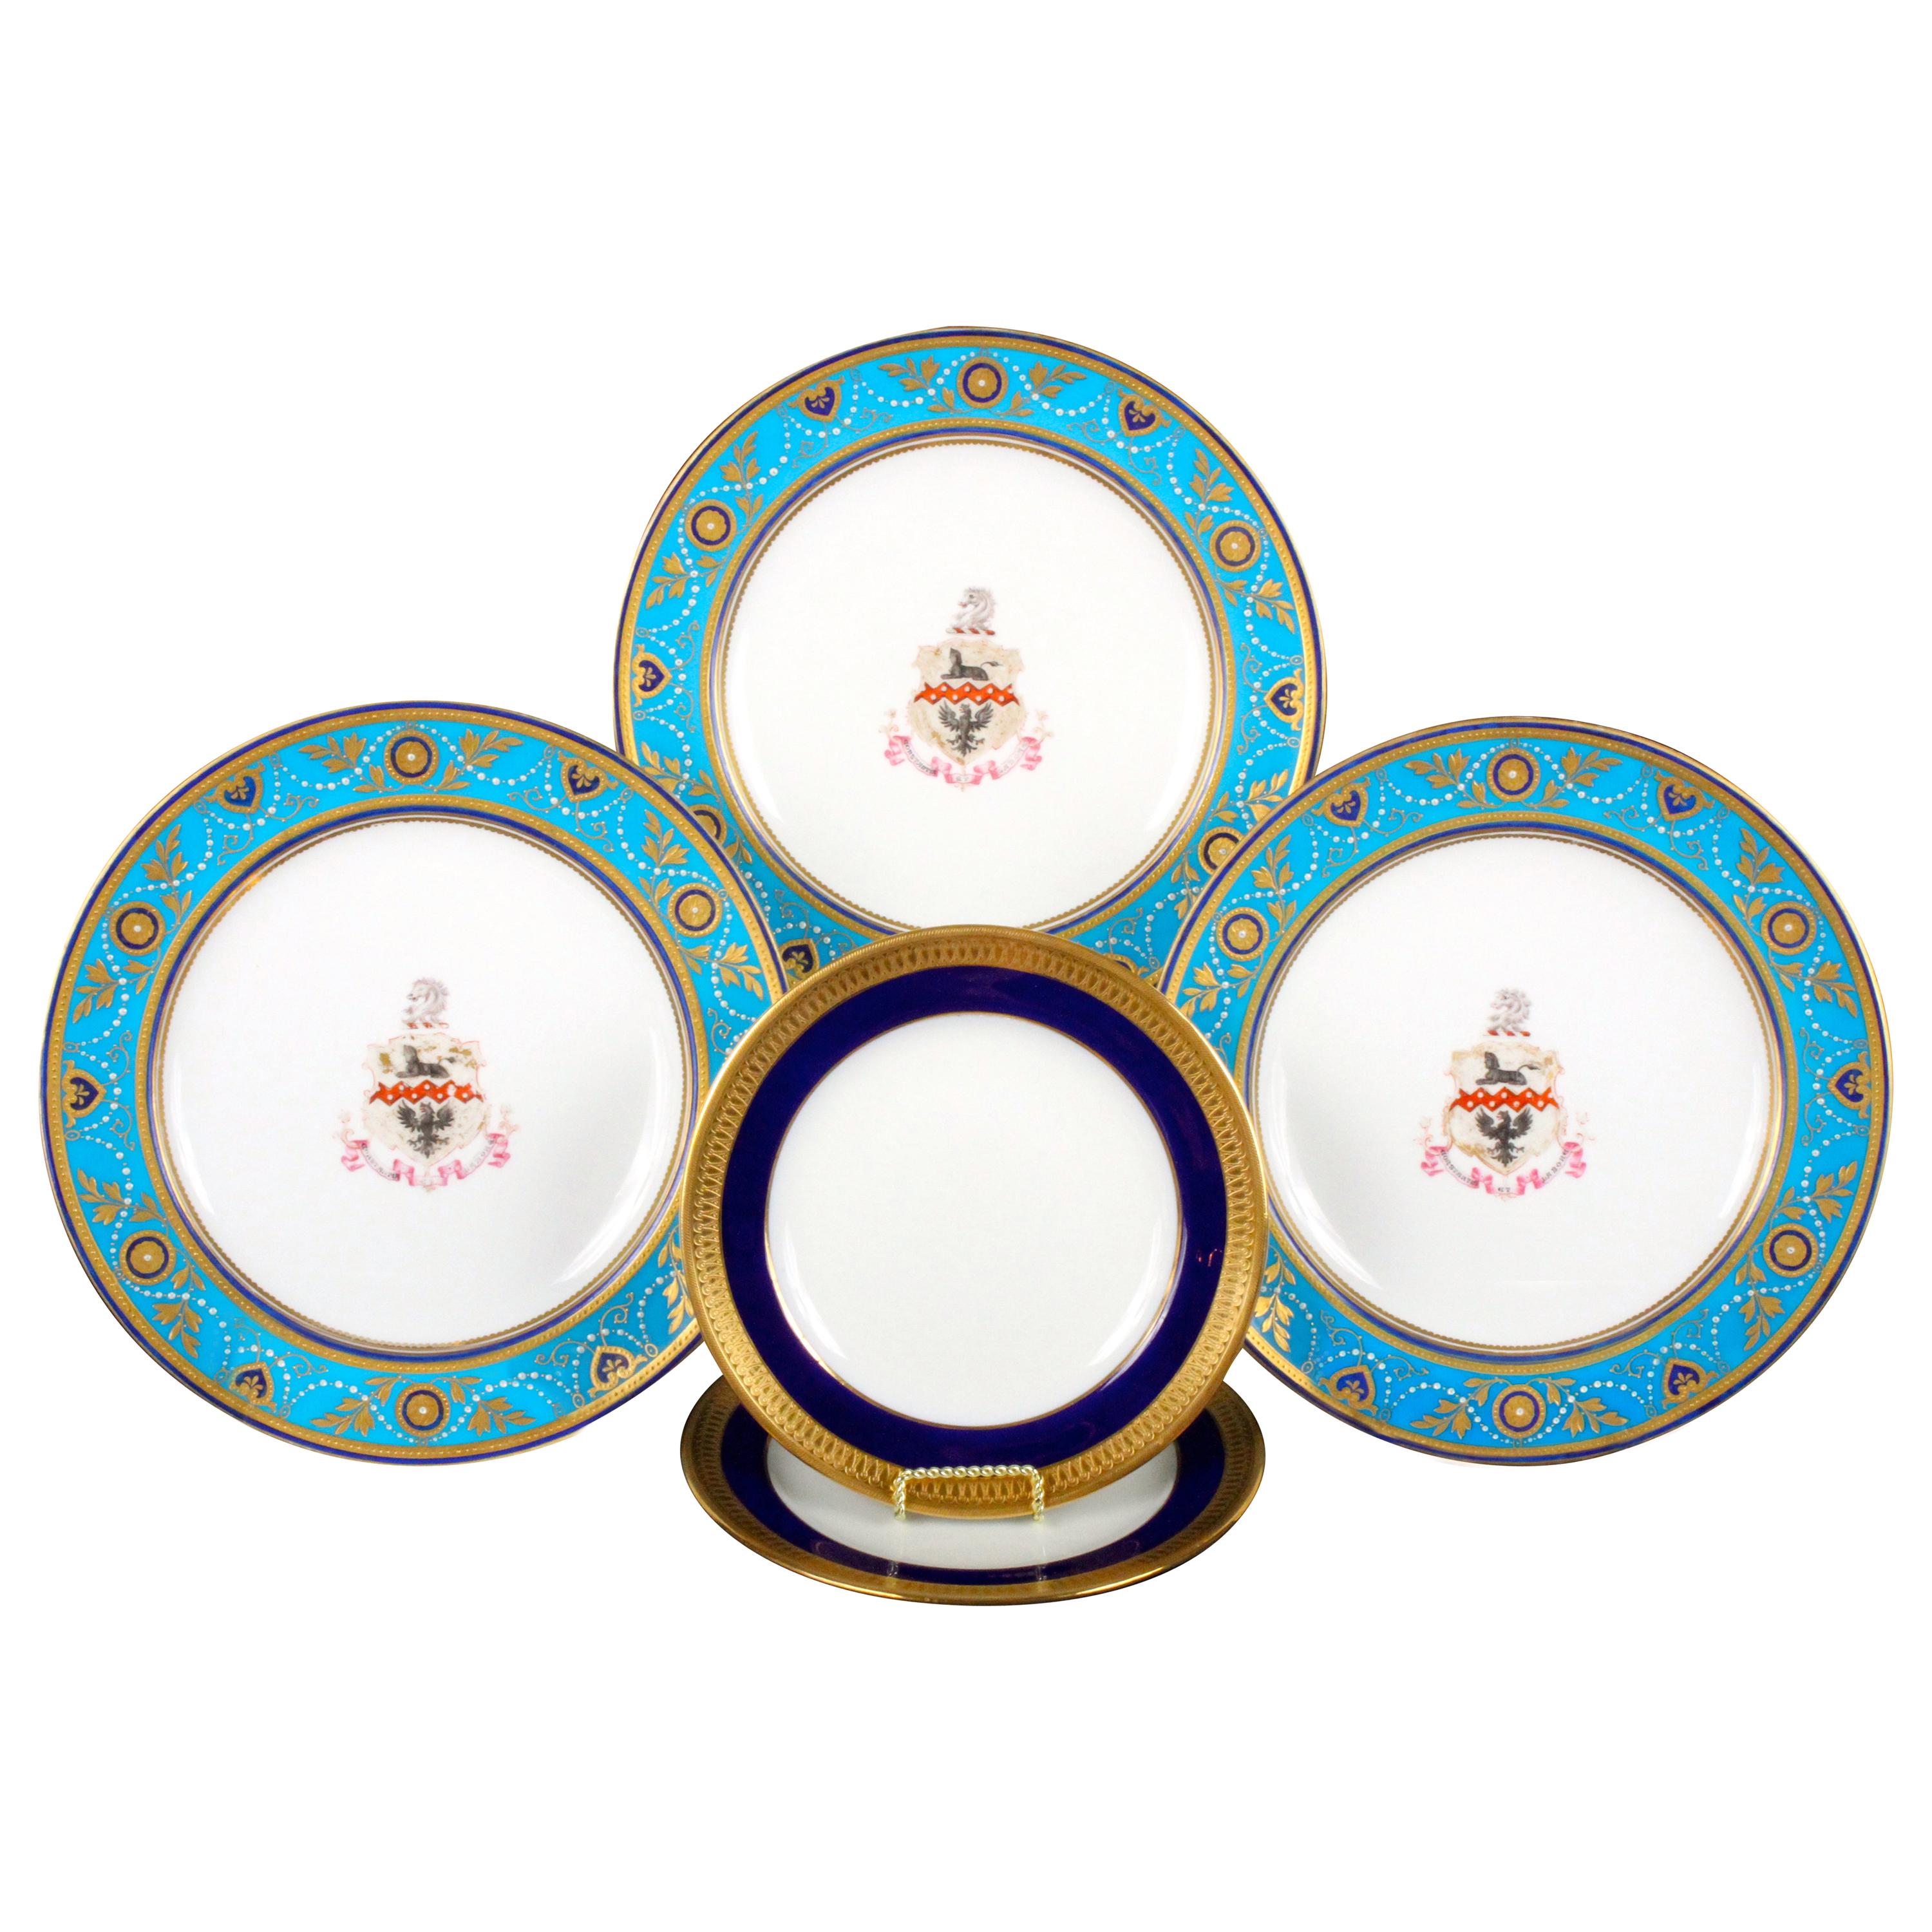 Service of Minton Turquoise and Gold Encrusted Armorial Plates with Side Plates For Sale